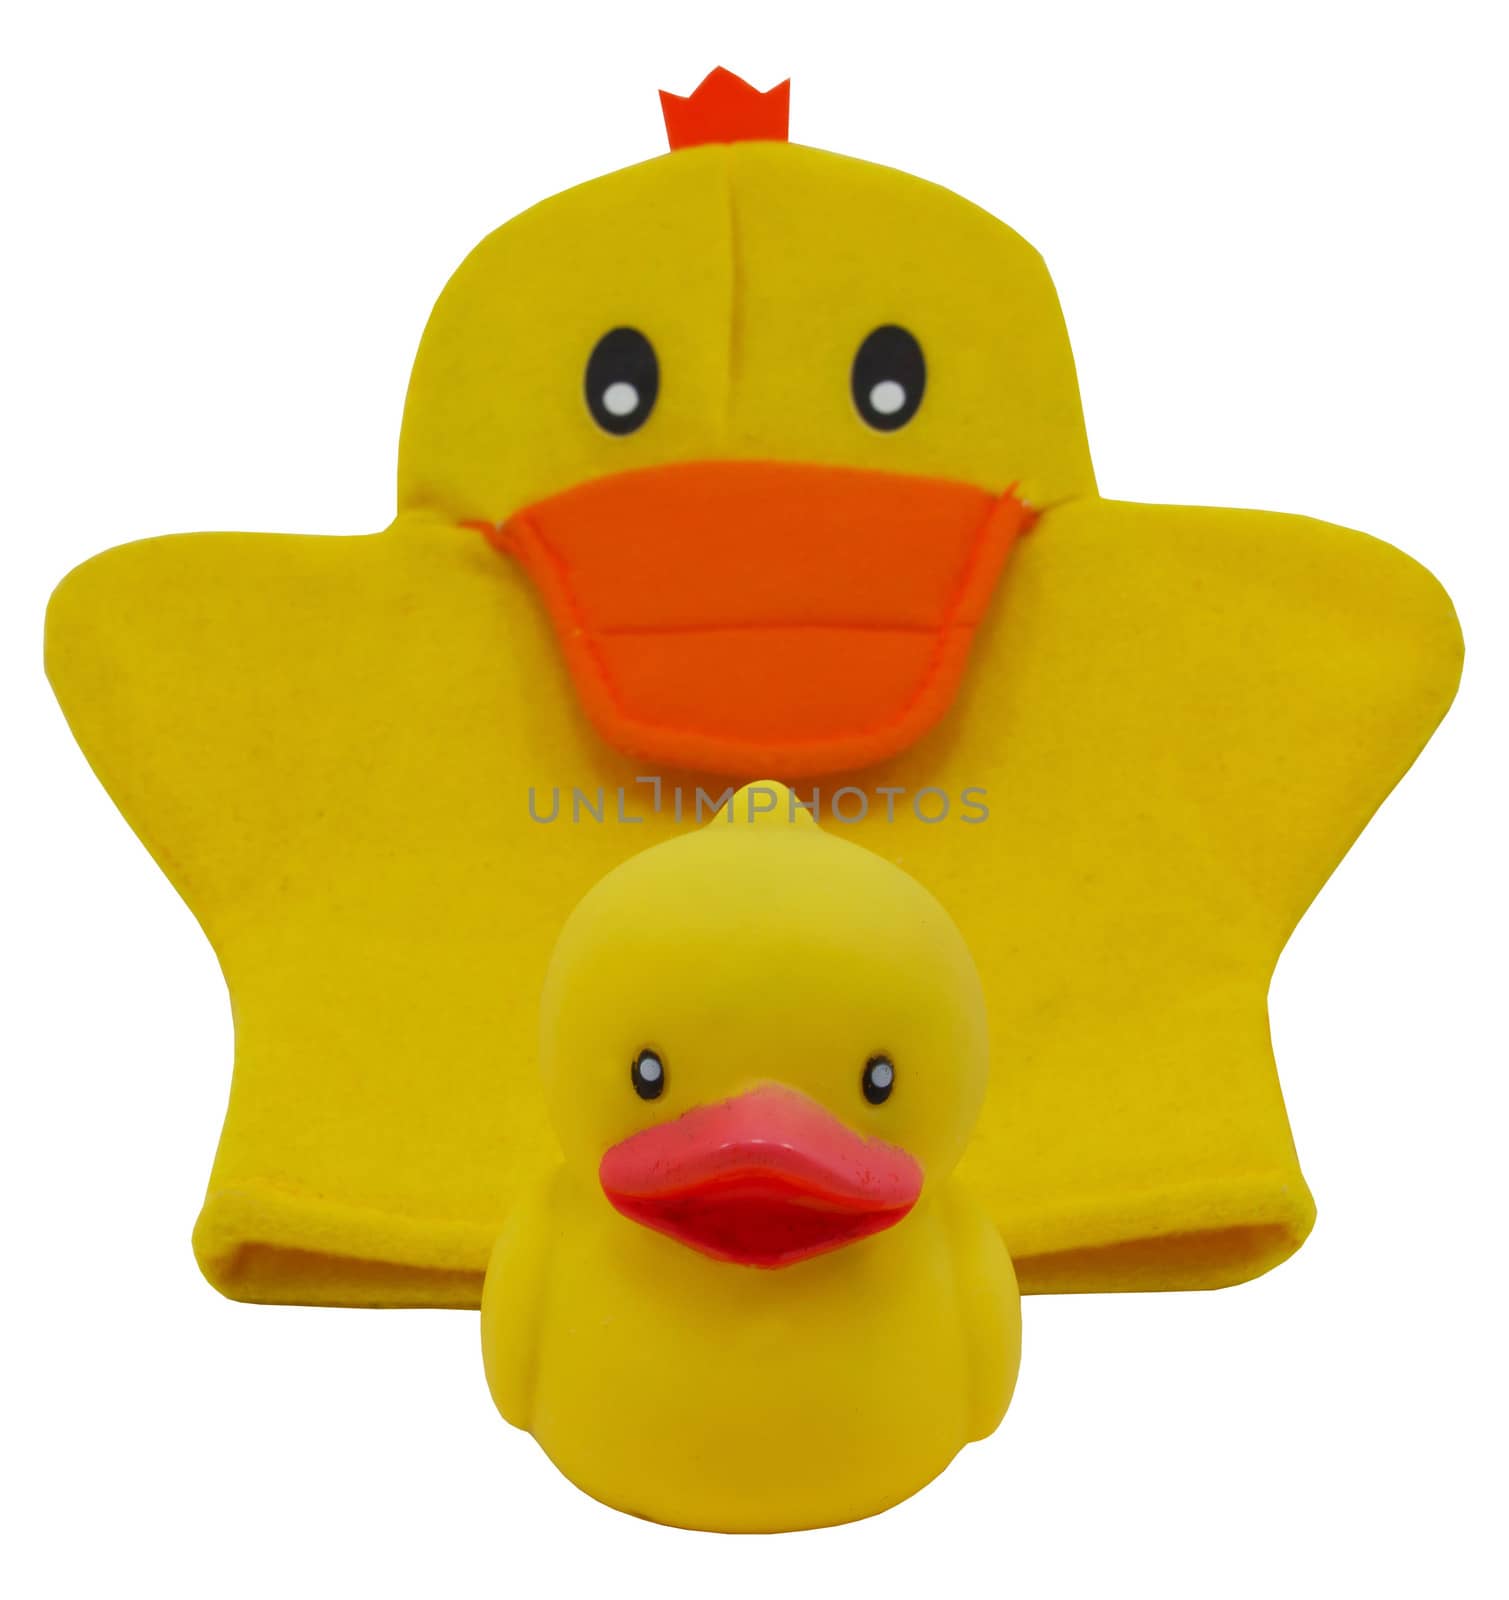 Two yellow rubber duck isolated on white by sutipp11